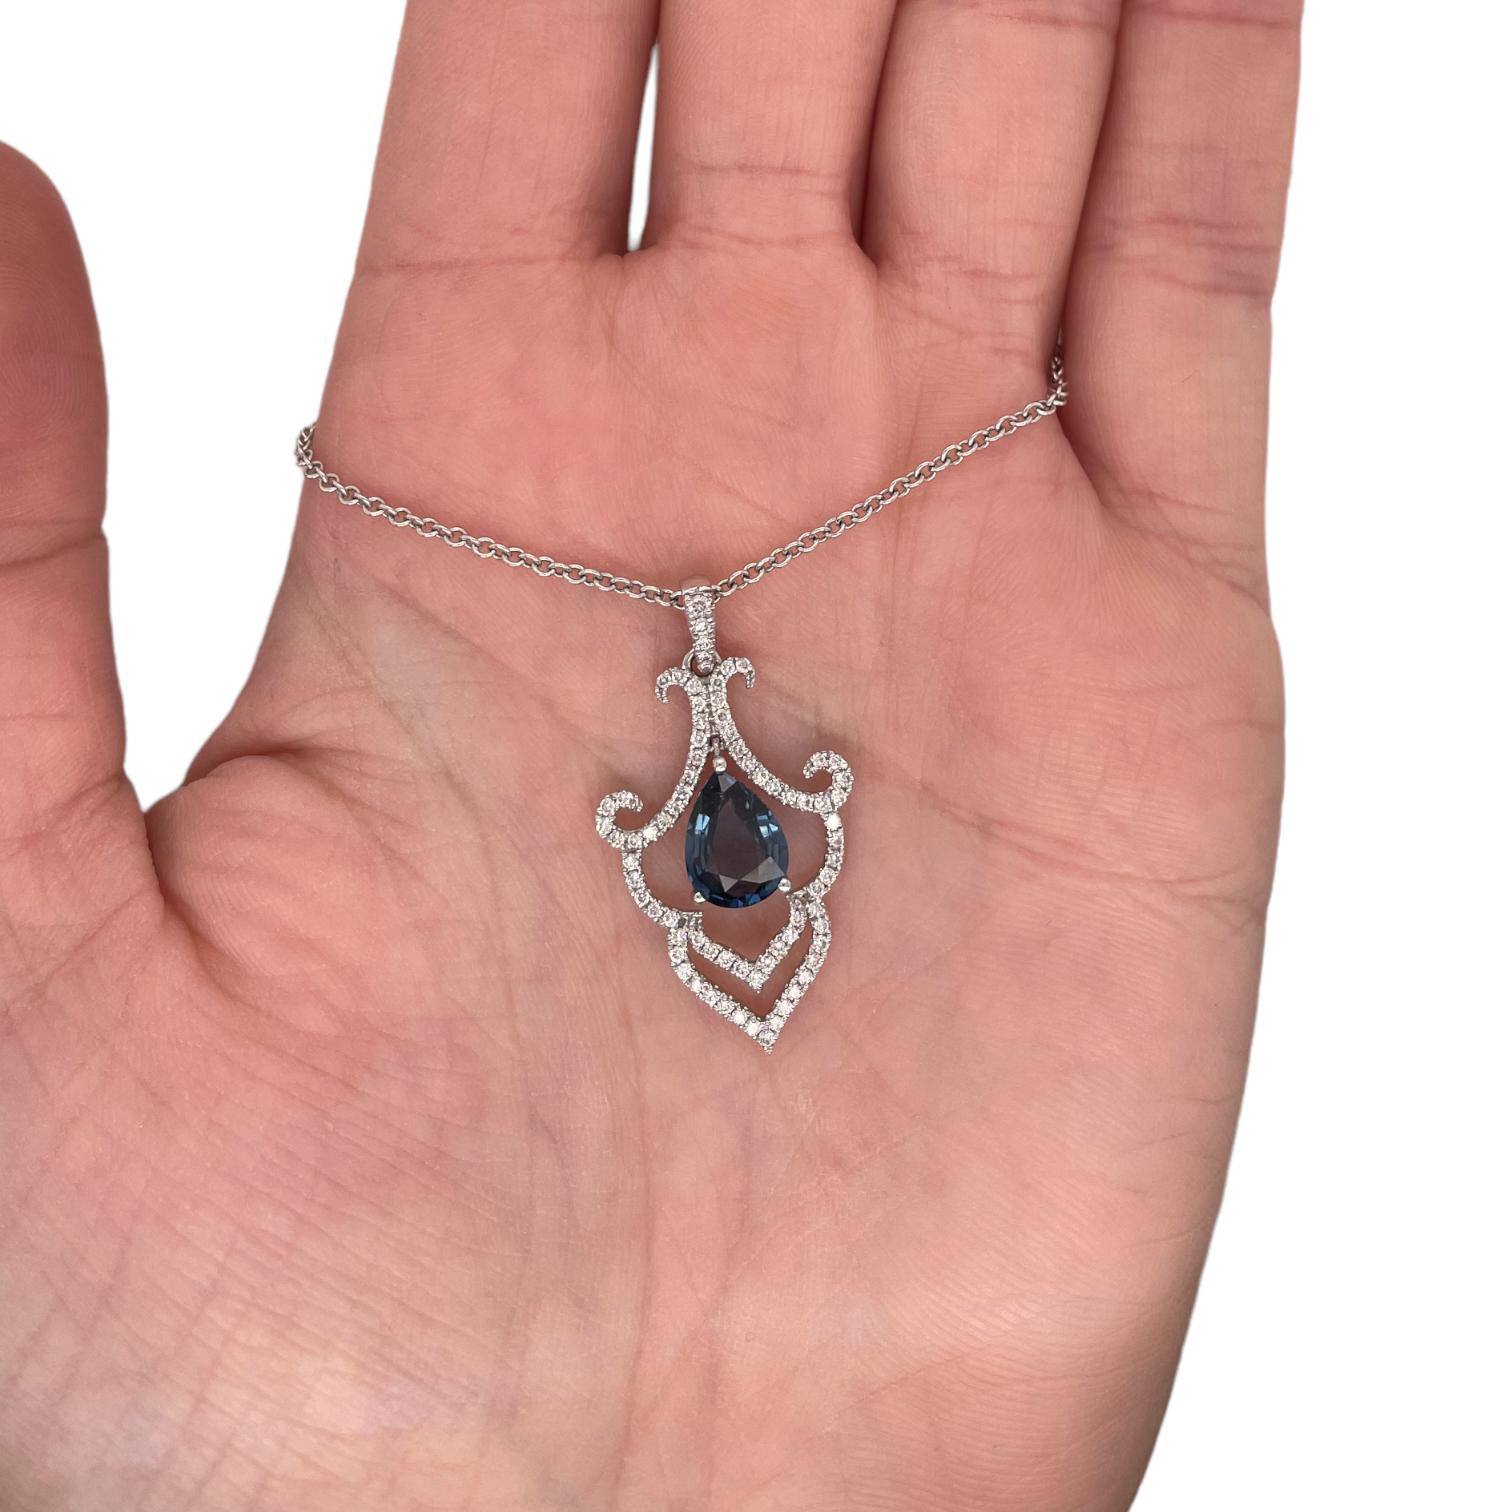 Pendant contains 1 center pear shape sapphire, 1.61ct. Sapphire dangles from a fancy halo containing round brilliant diamonds weighing a total of 0.45tcts. Diamonds are near colorless and SI1 in clarity. Pendant hangs from a 14k white gold 16